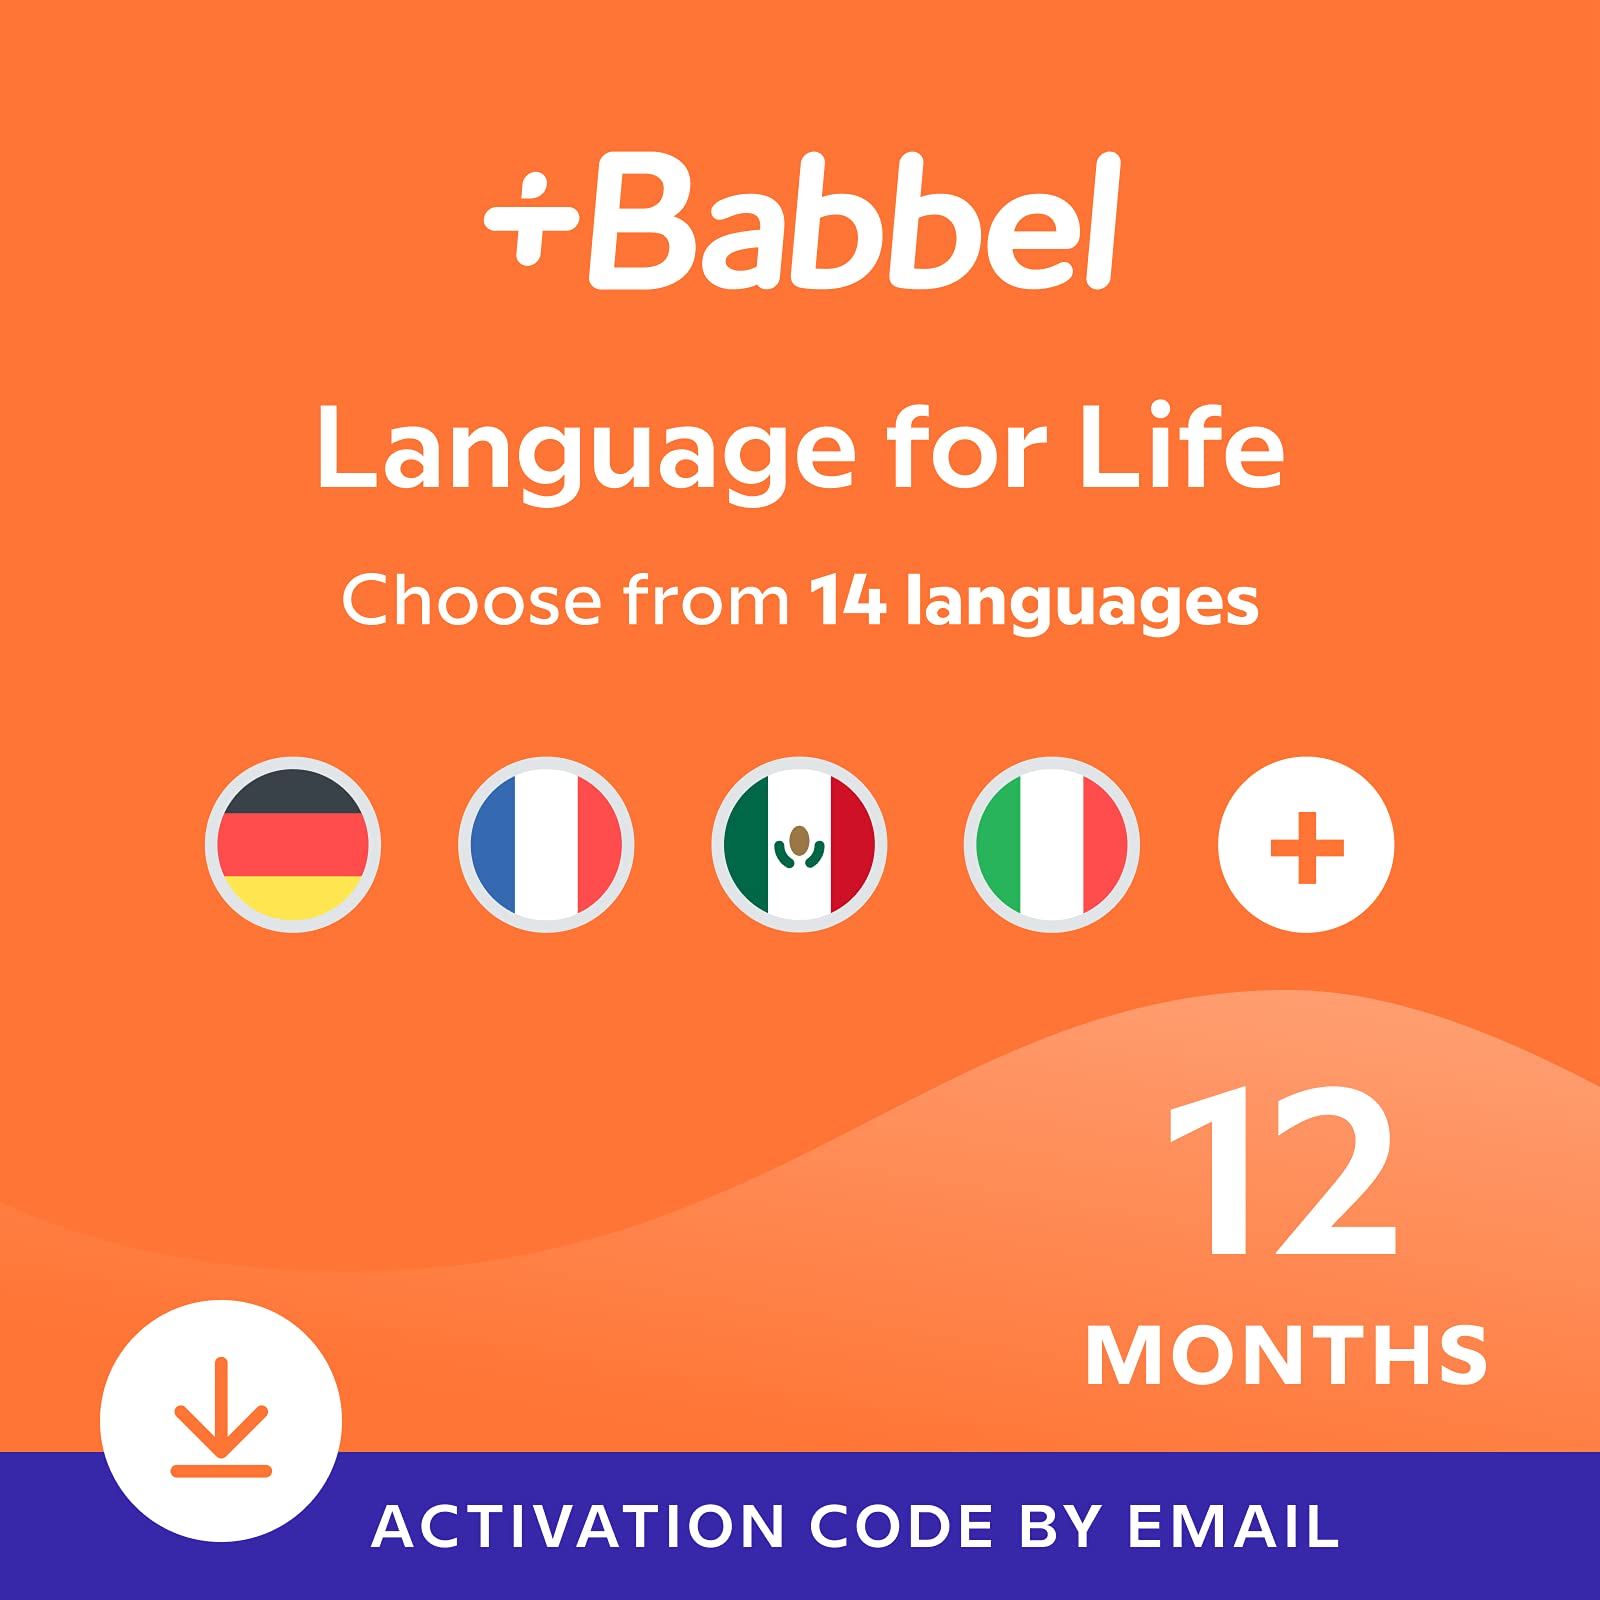 Mua Babbel Language Learning Software - Learn To Speak Spanish, French,  English, & More - 14 Languages To Choose From - Compatible With Ios,  Android, Mac & Pc (12 Month Subscription) Trên